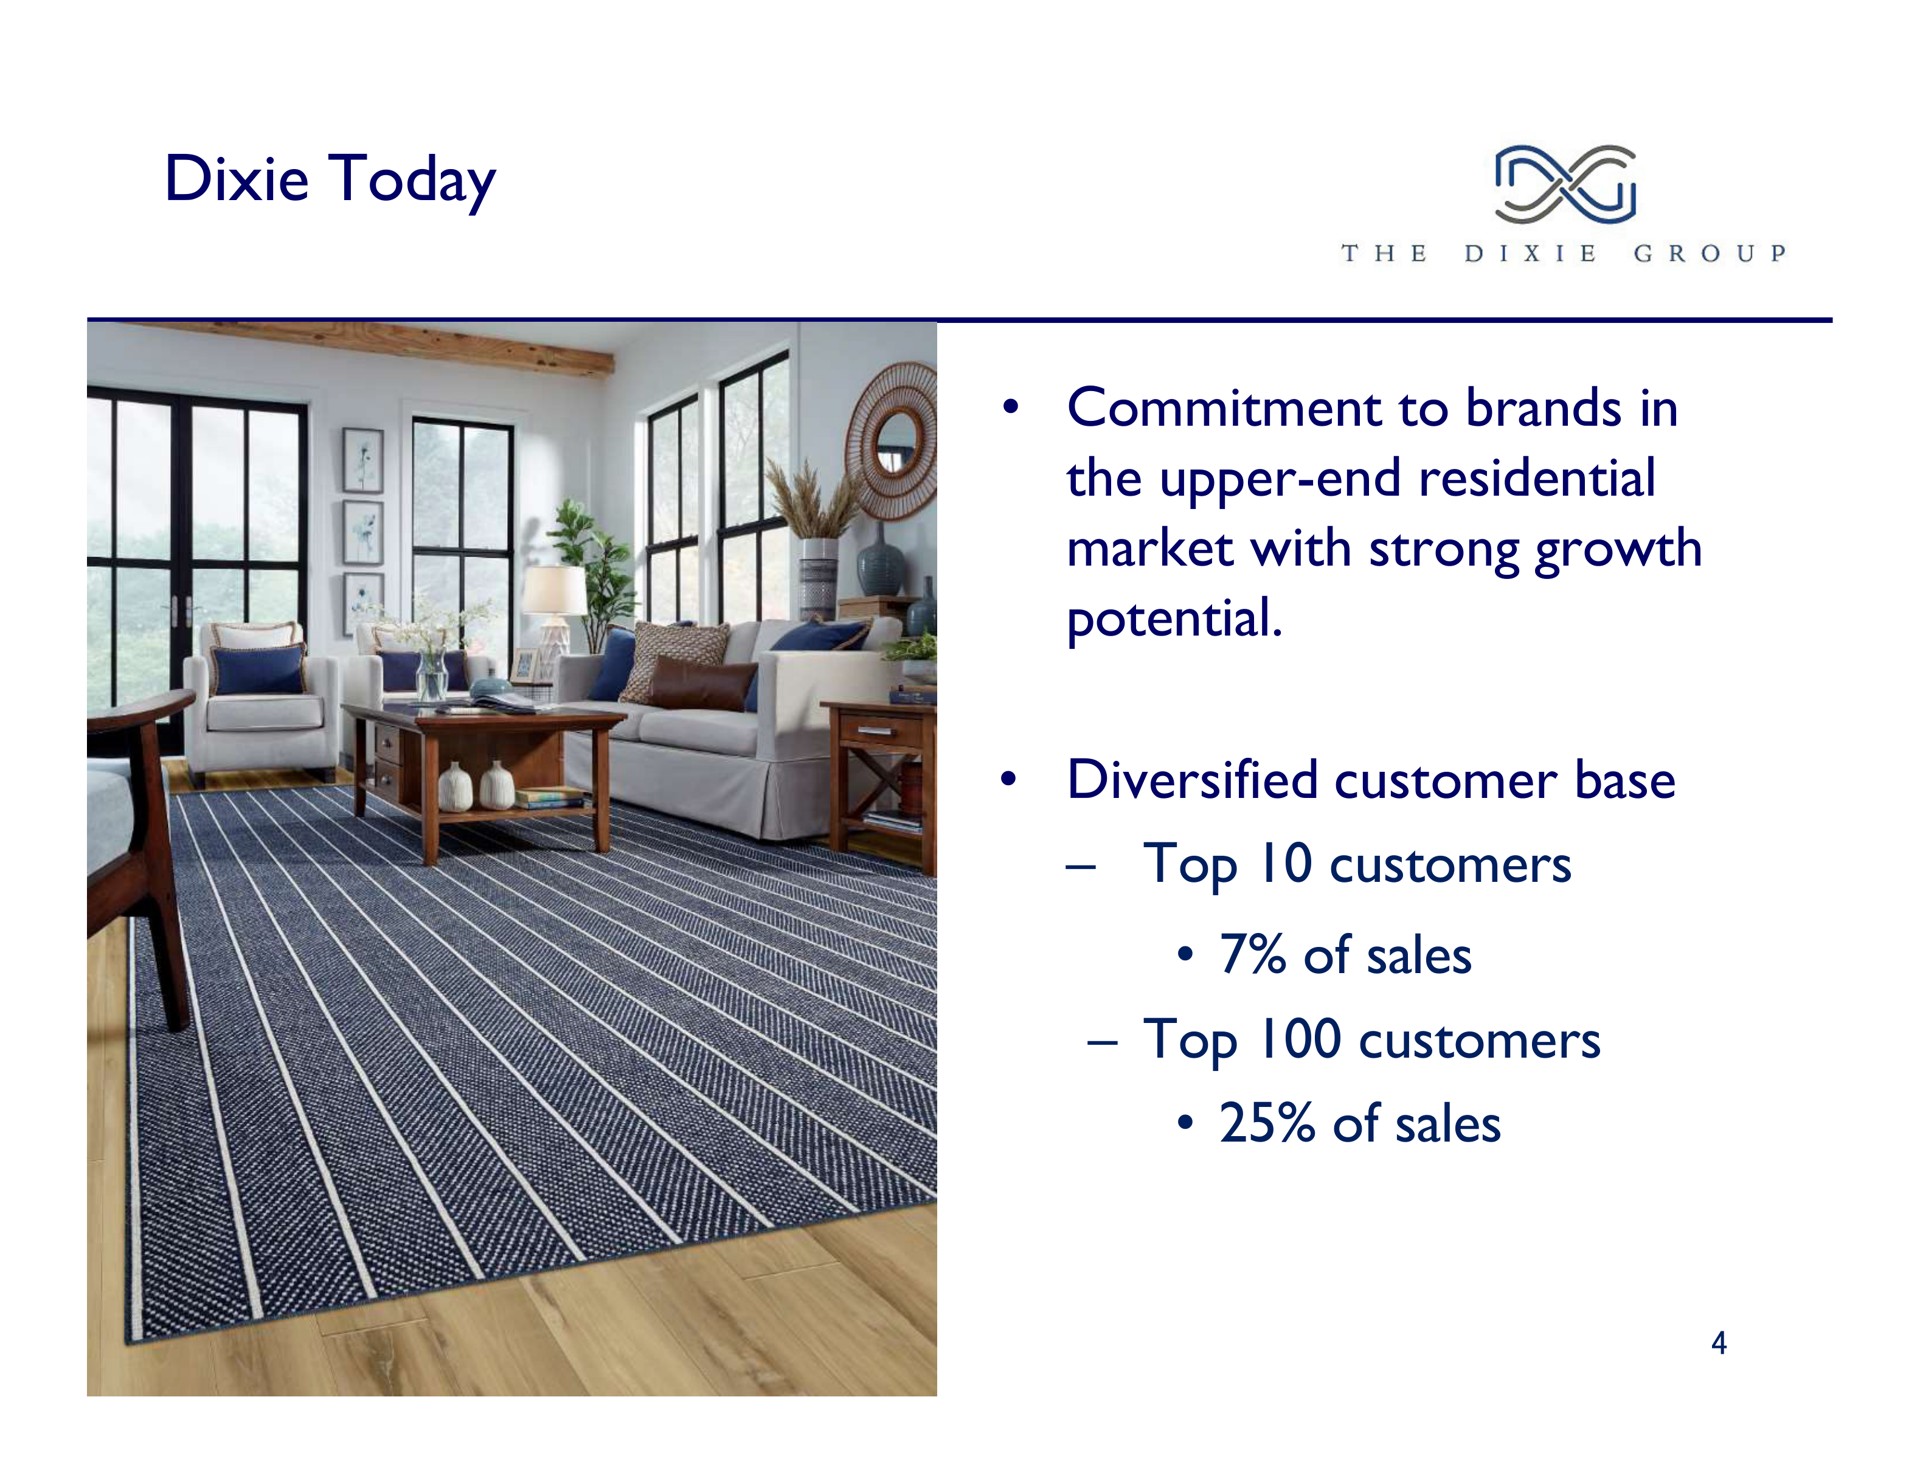 dixie today commitment to brands in top customers | The Dixie Group